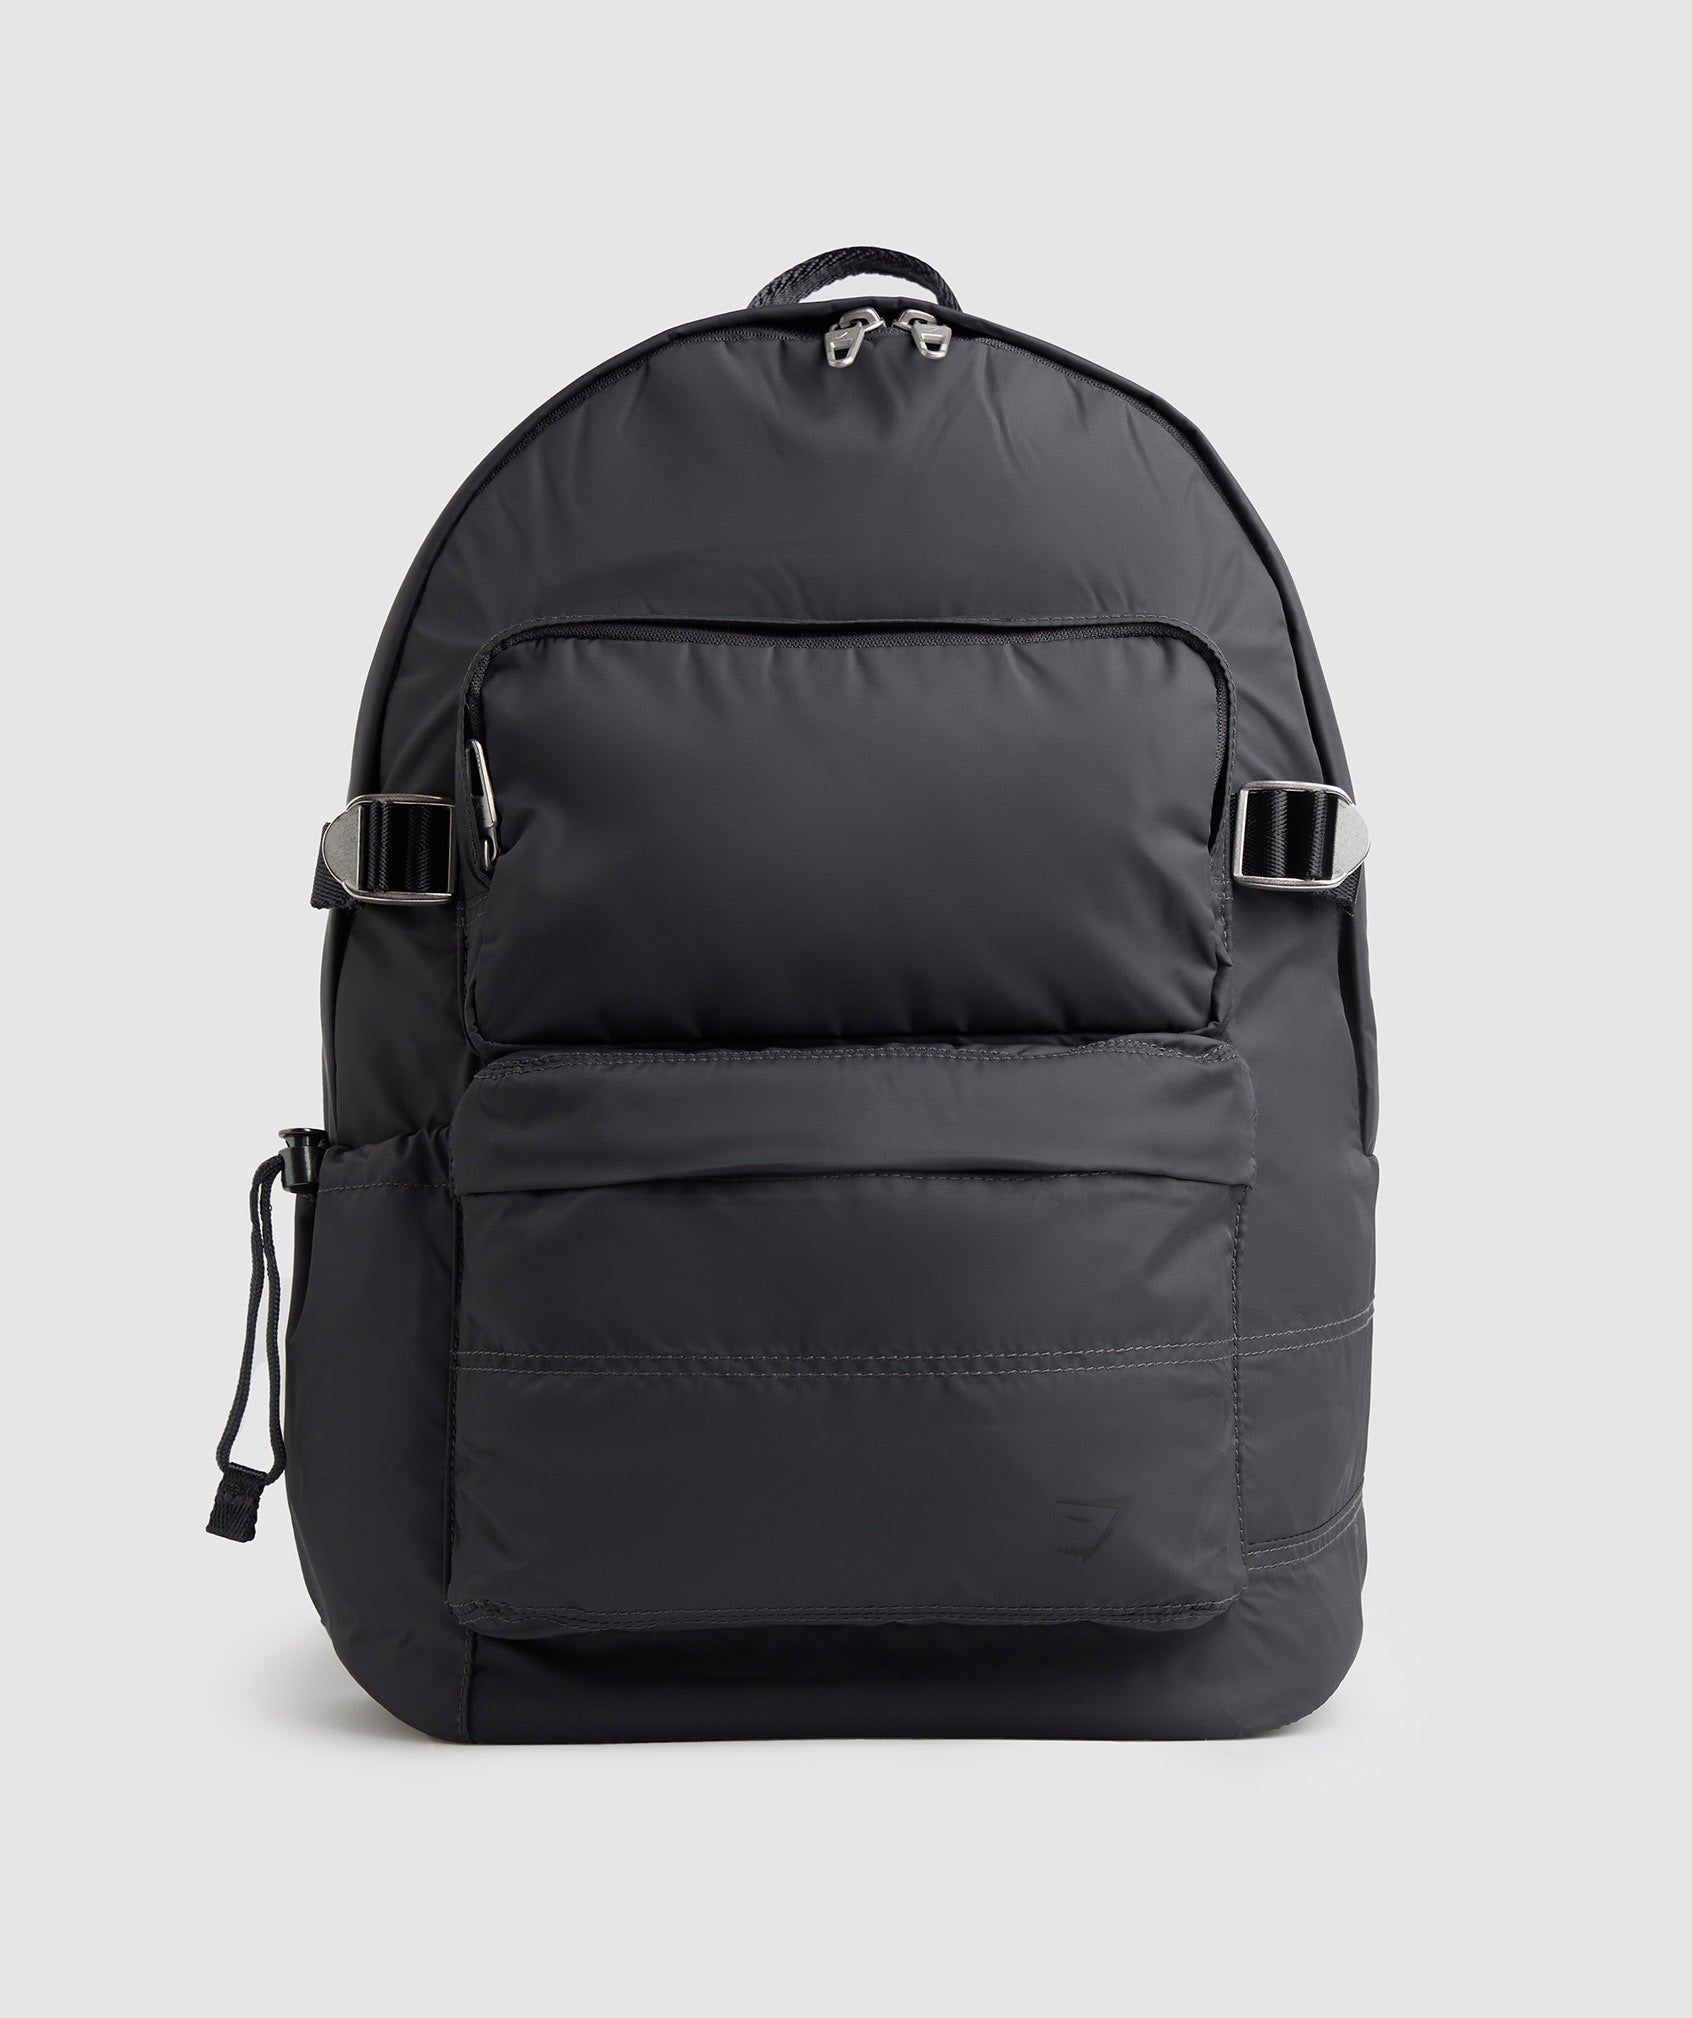 Premium Lifestyle Backpack in Onyx Grey